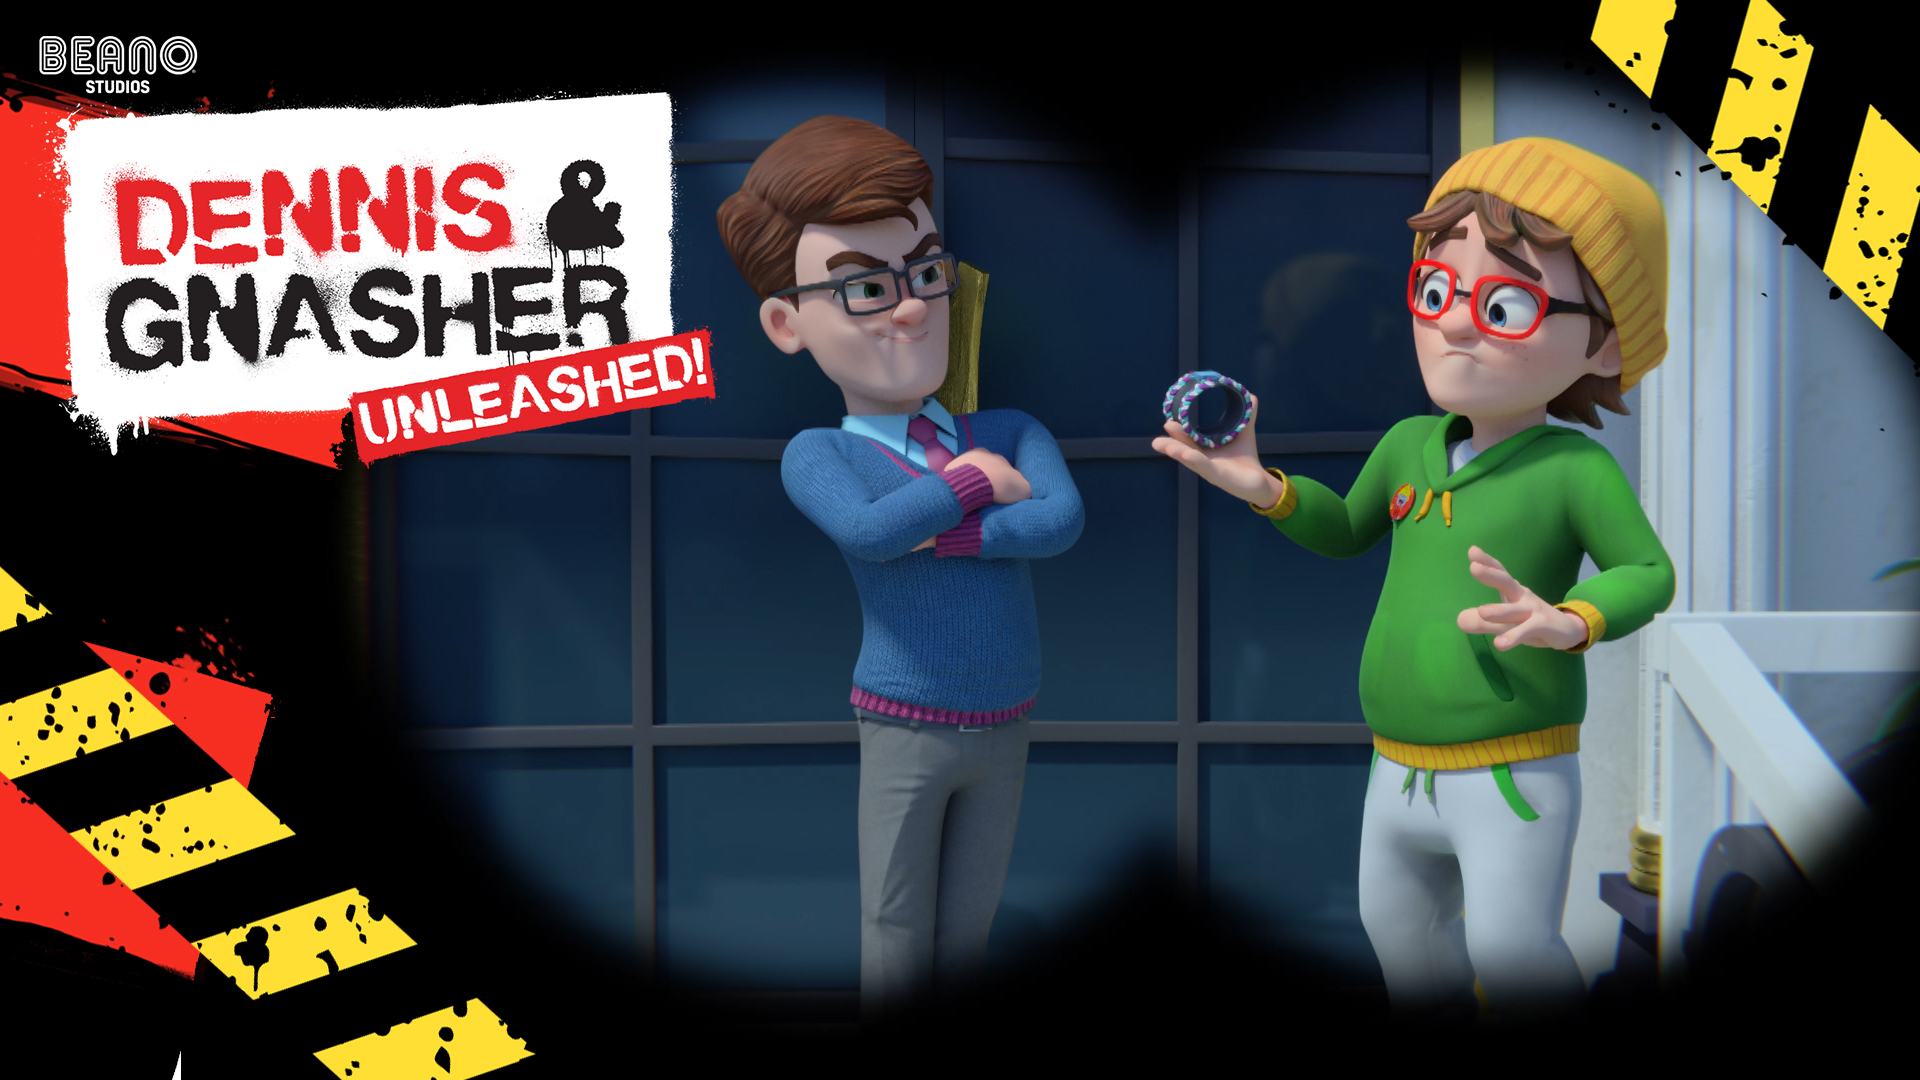 Dennis & Gnasher Unleashed! Series 2 - Episode 2: The P Factor